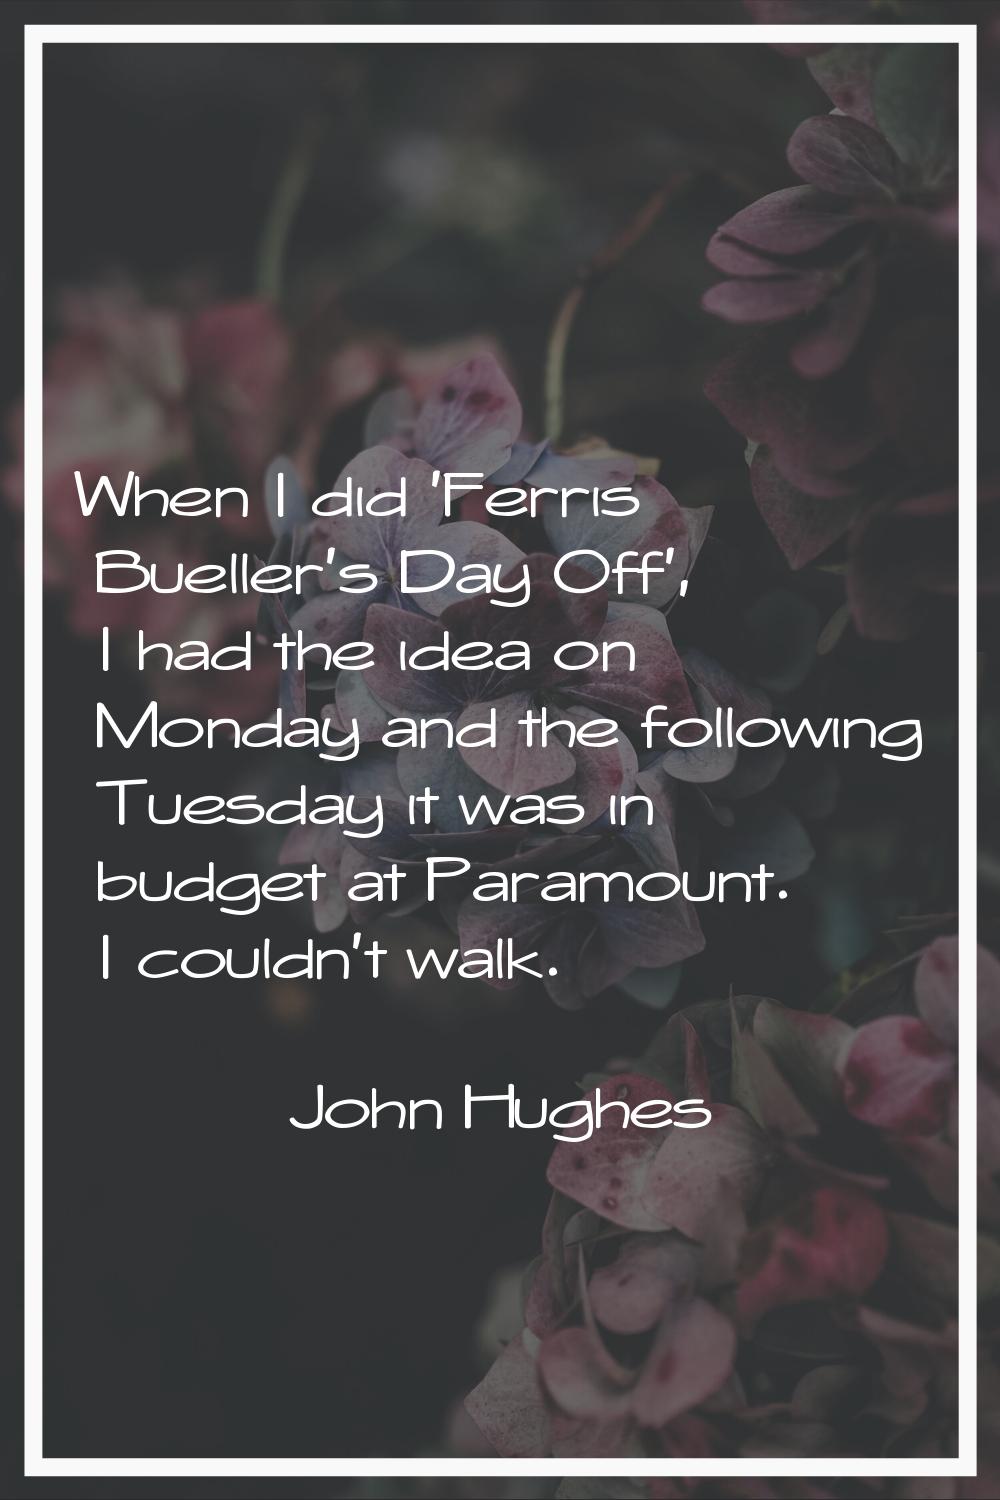 When I did 'Ferris Bueller's Day Off', I had the idea on Monday and the following Tuesday it was in